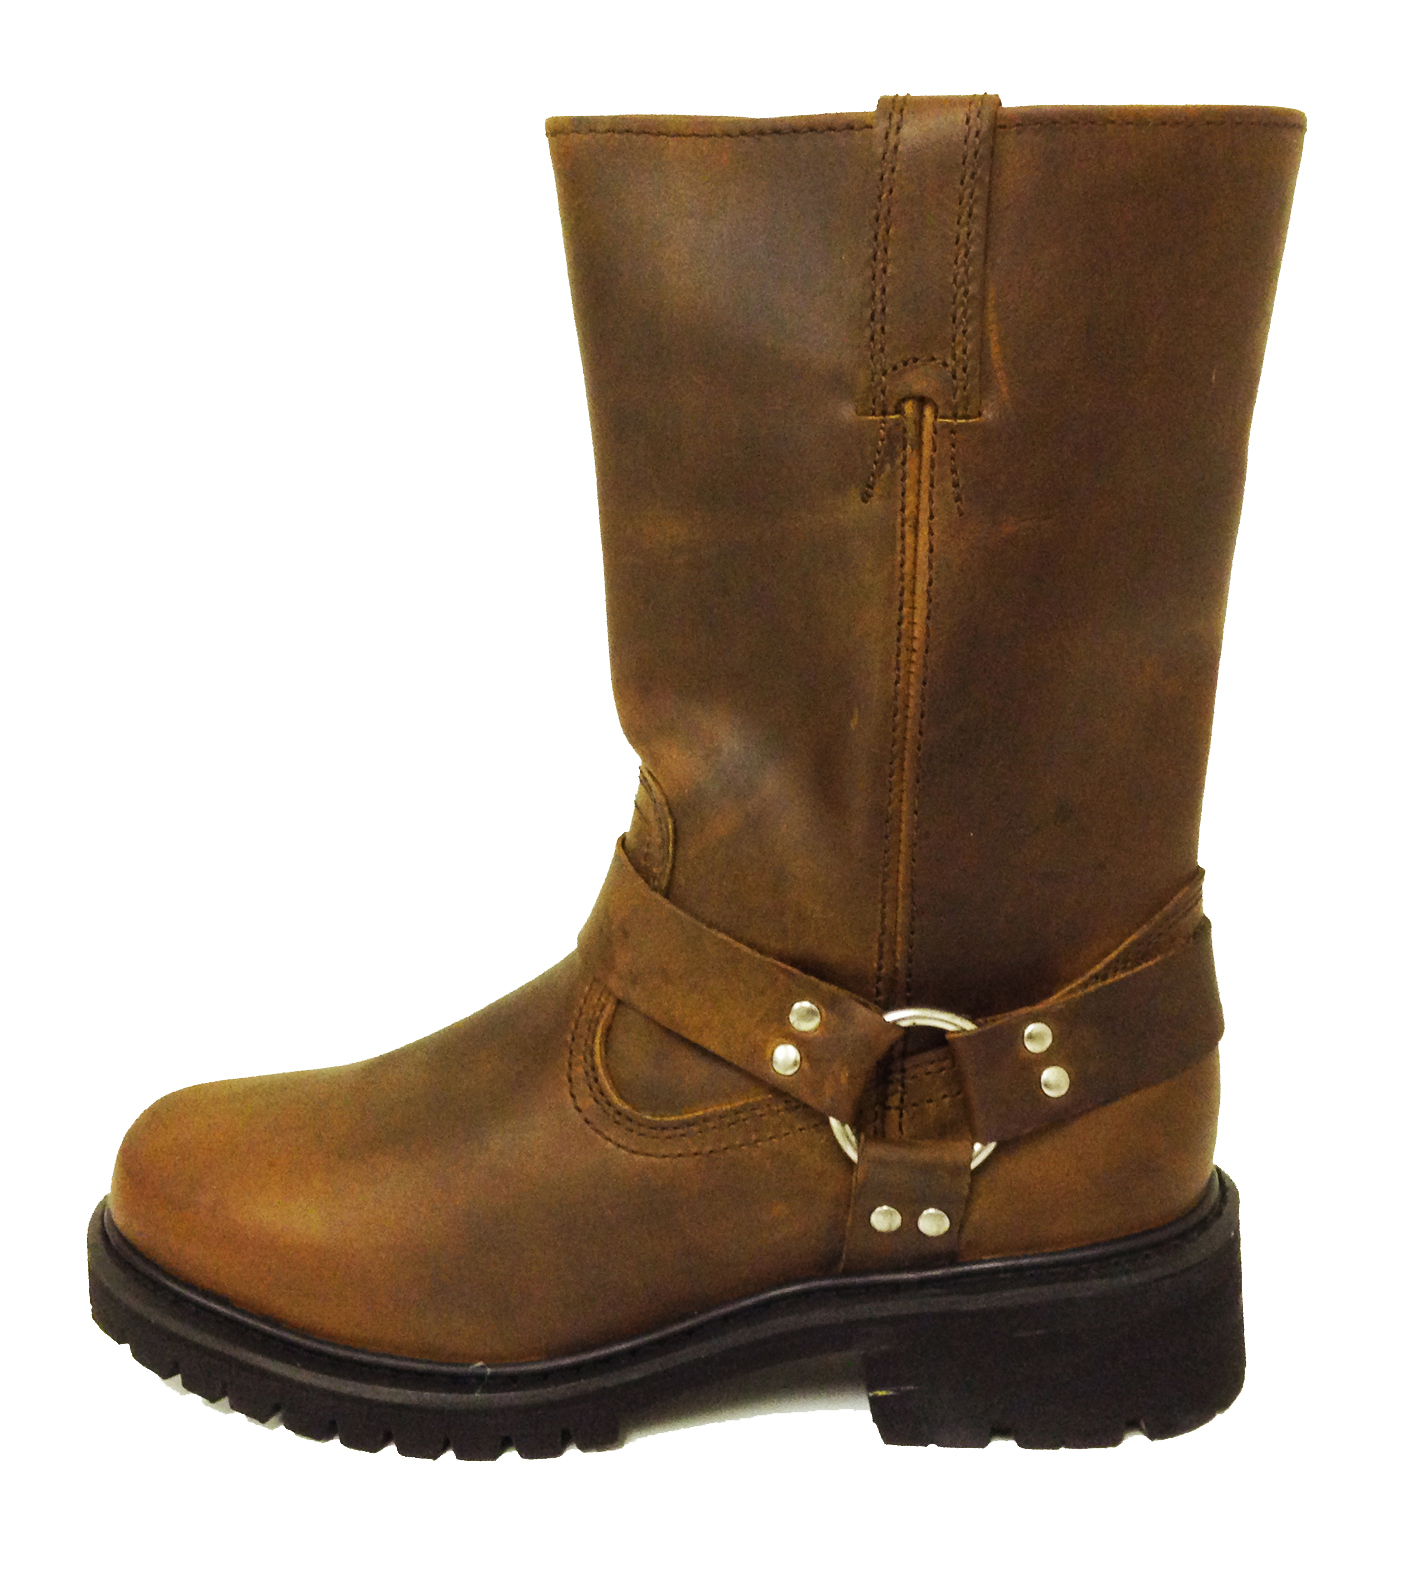 Men's Motorcycle Boots Engineer Harness Full Grain Leather 12" Classic Biker Riding - image 3 of 3